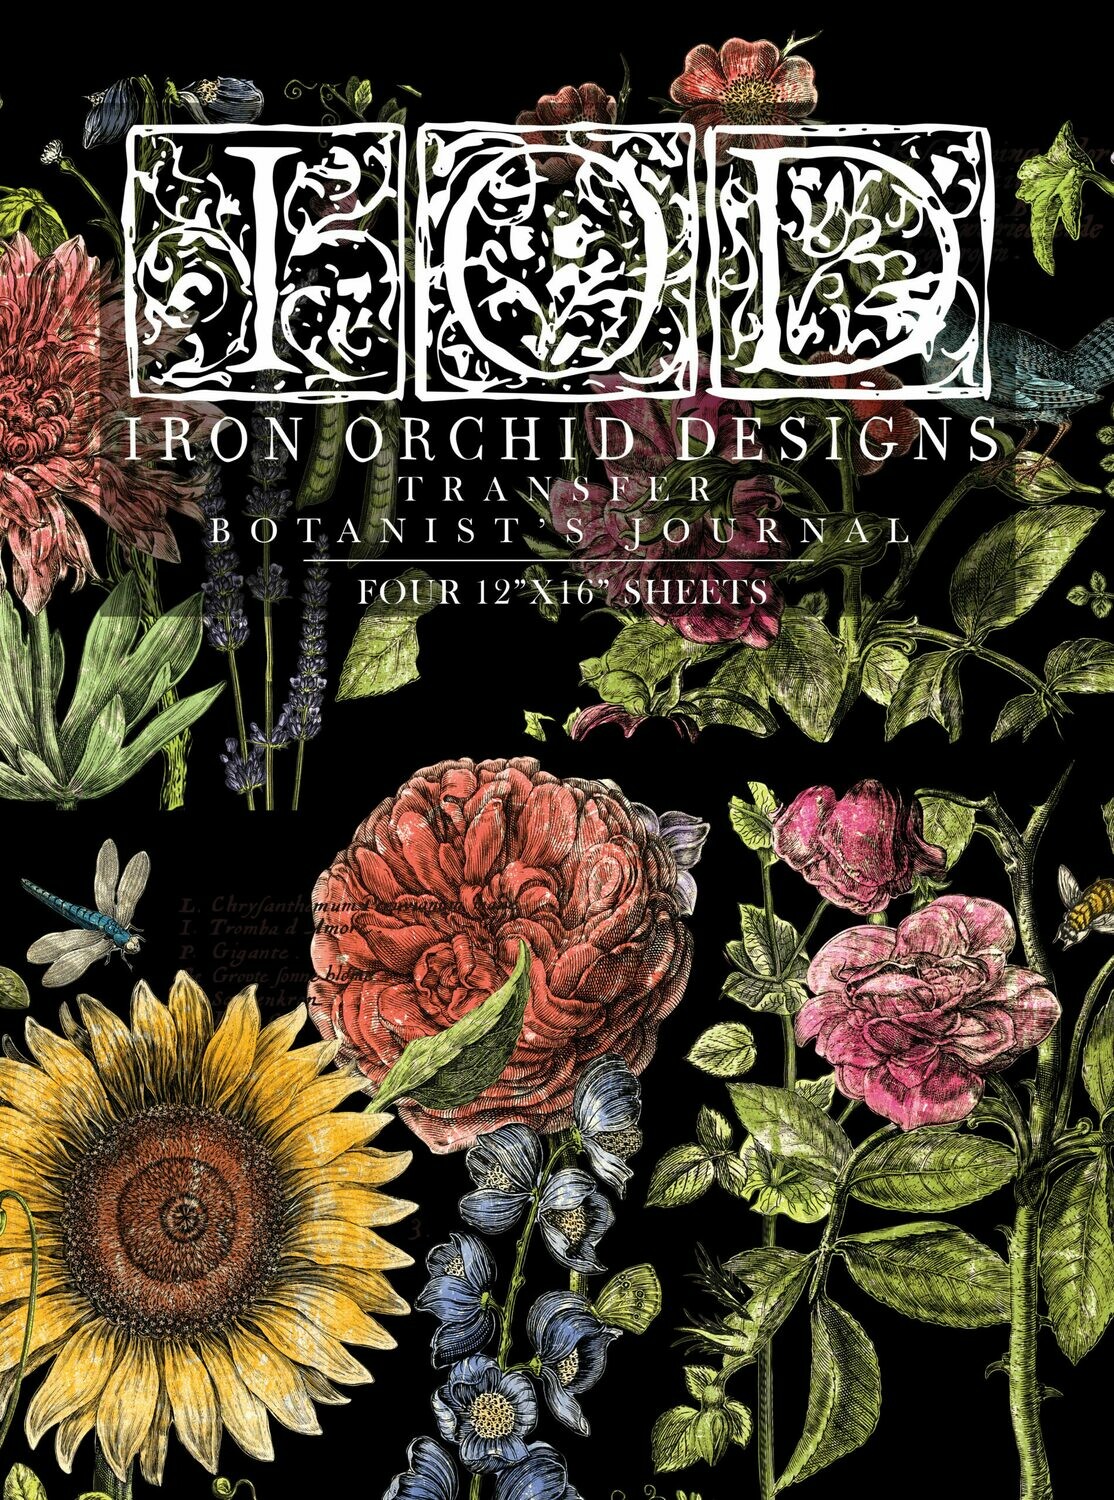 BOTANIST’S JOURNAL TRANSFER by IOD - Iron Orchid Designs